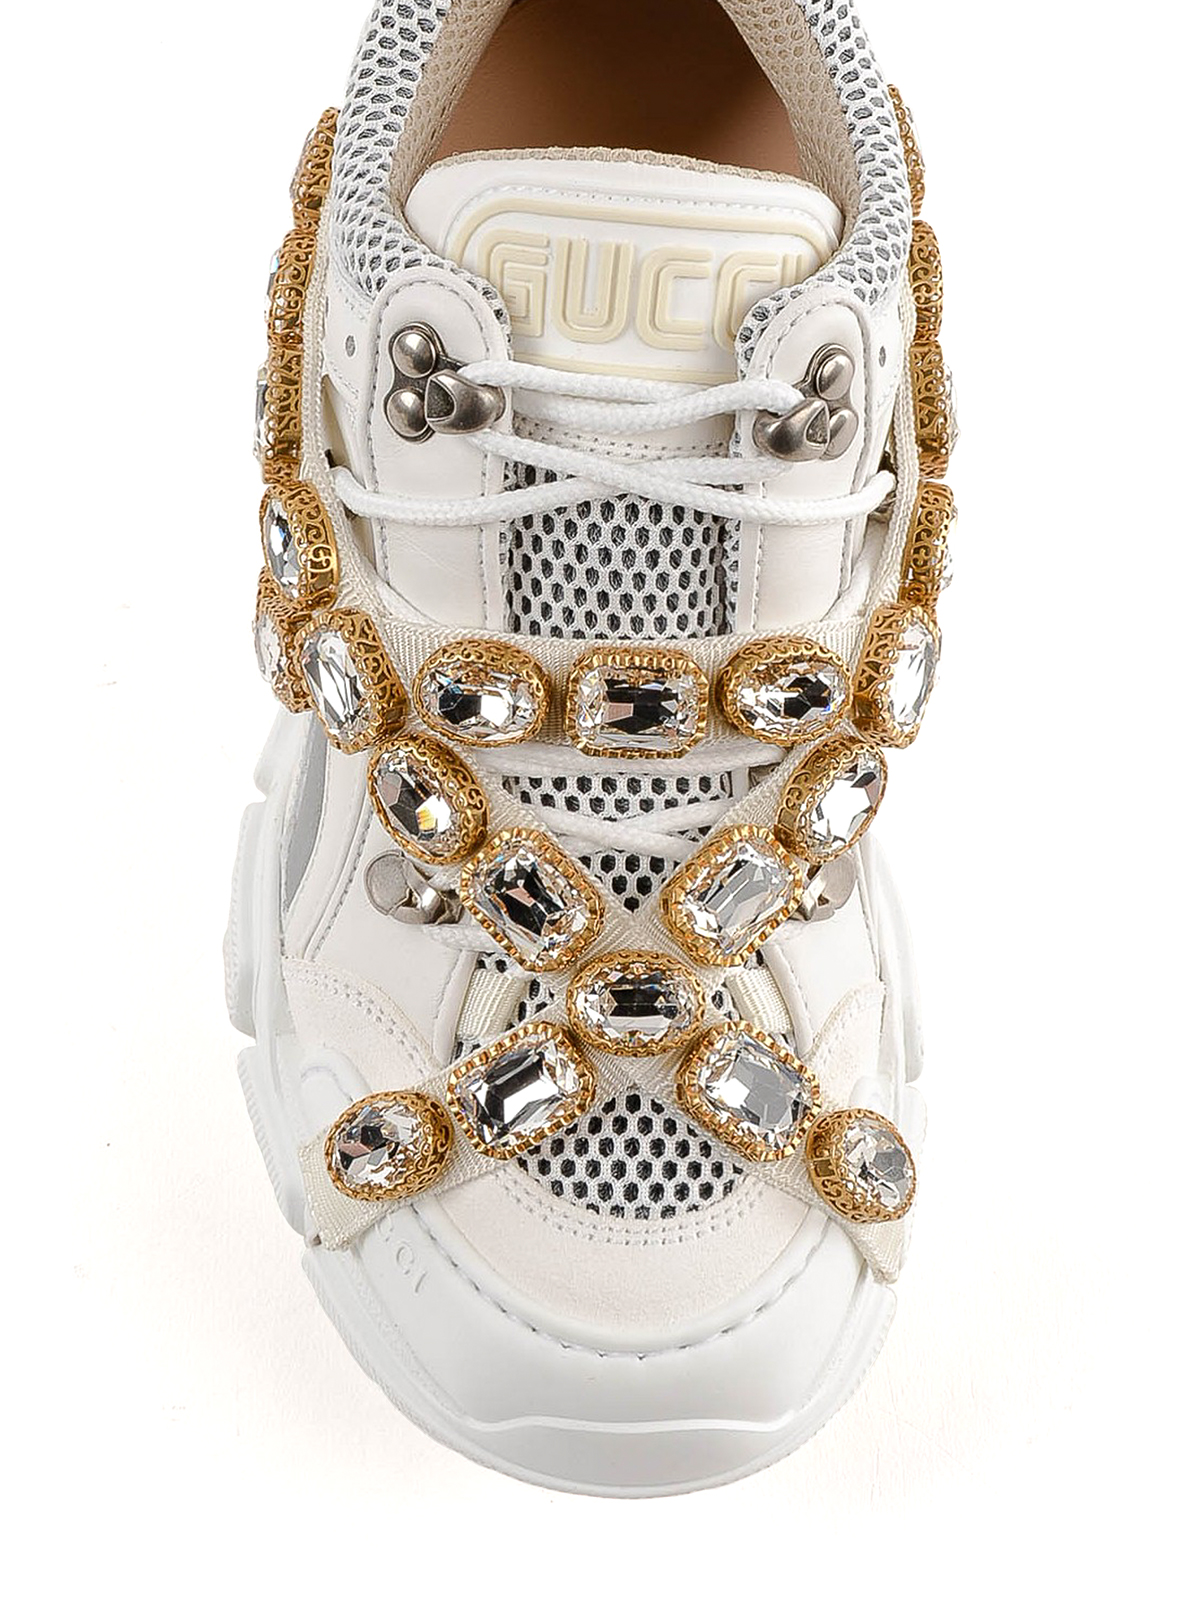 gucci sneakers with removable crystals